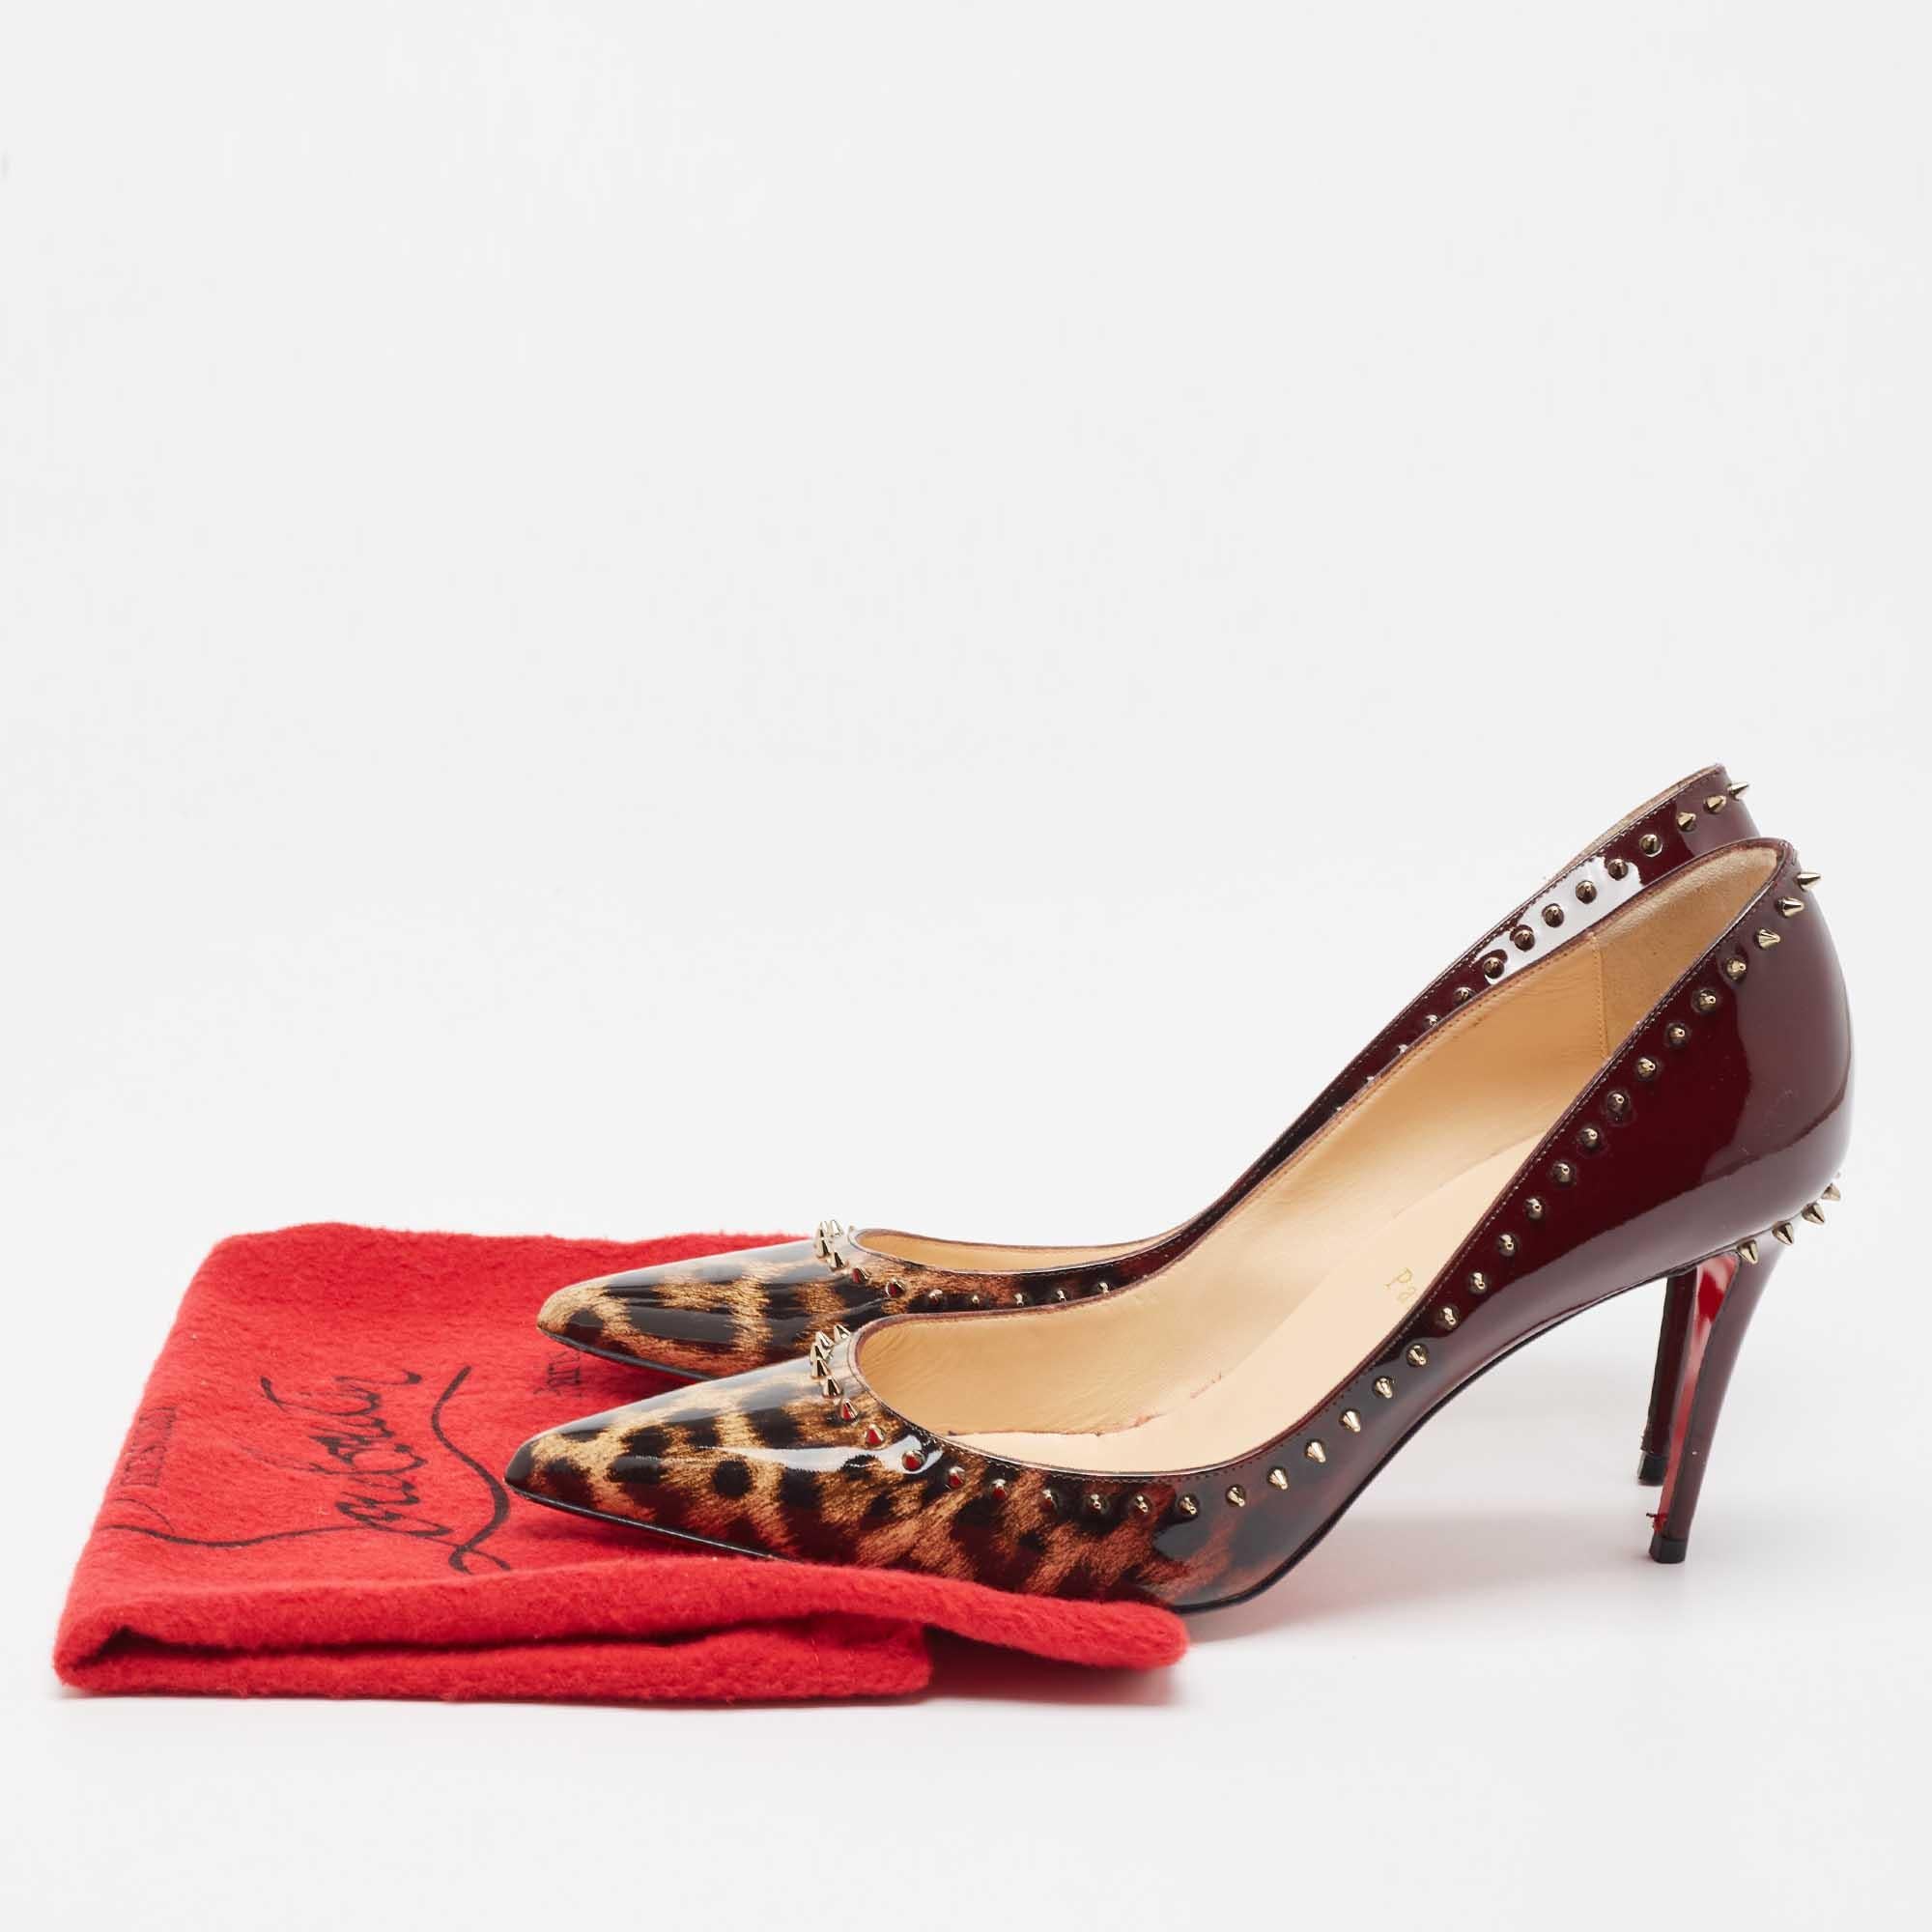 Christian Louboutin Tricolor Ombre Leopard Print Patent Leather Anjalina Pumps S 3